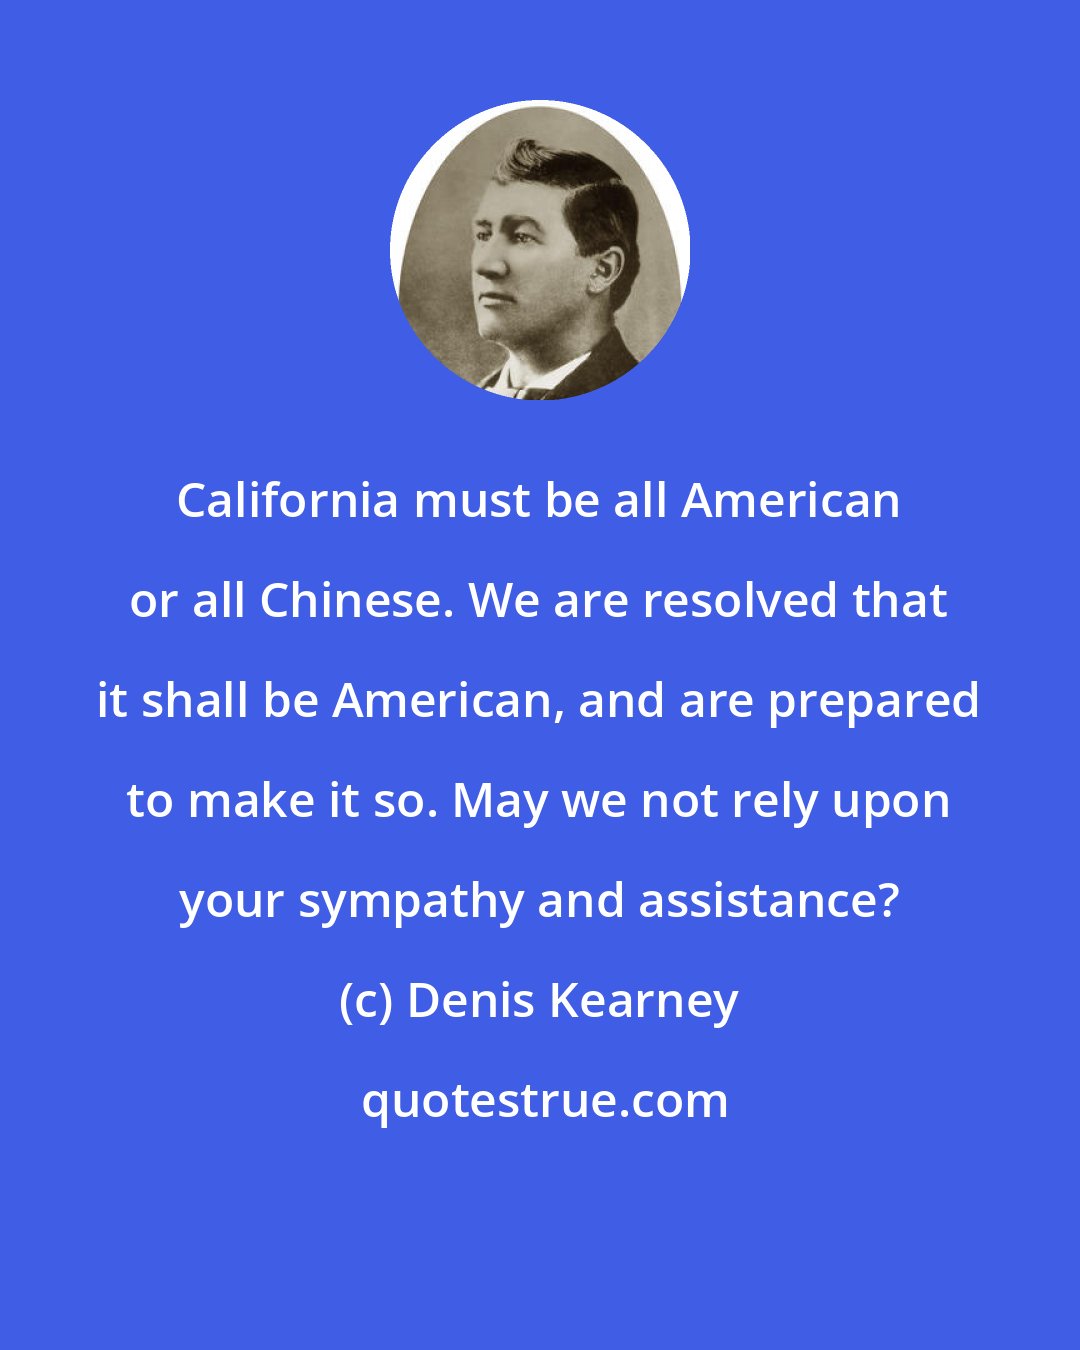 Denis Kearney: California must be all American or all Chinese. We are resolved that it shall be American, and are prepared to make it so. May we not rely upon your sympathy and assistance?